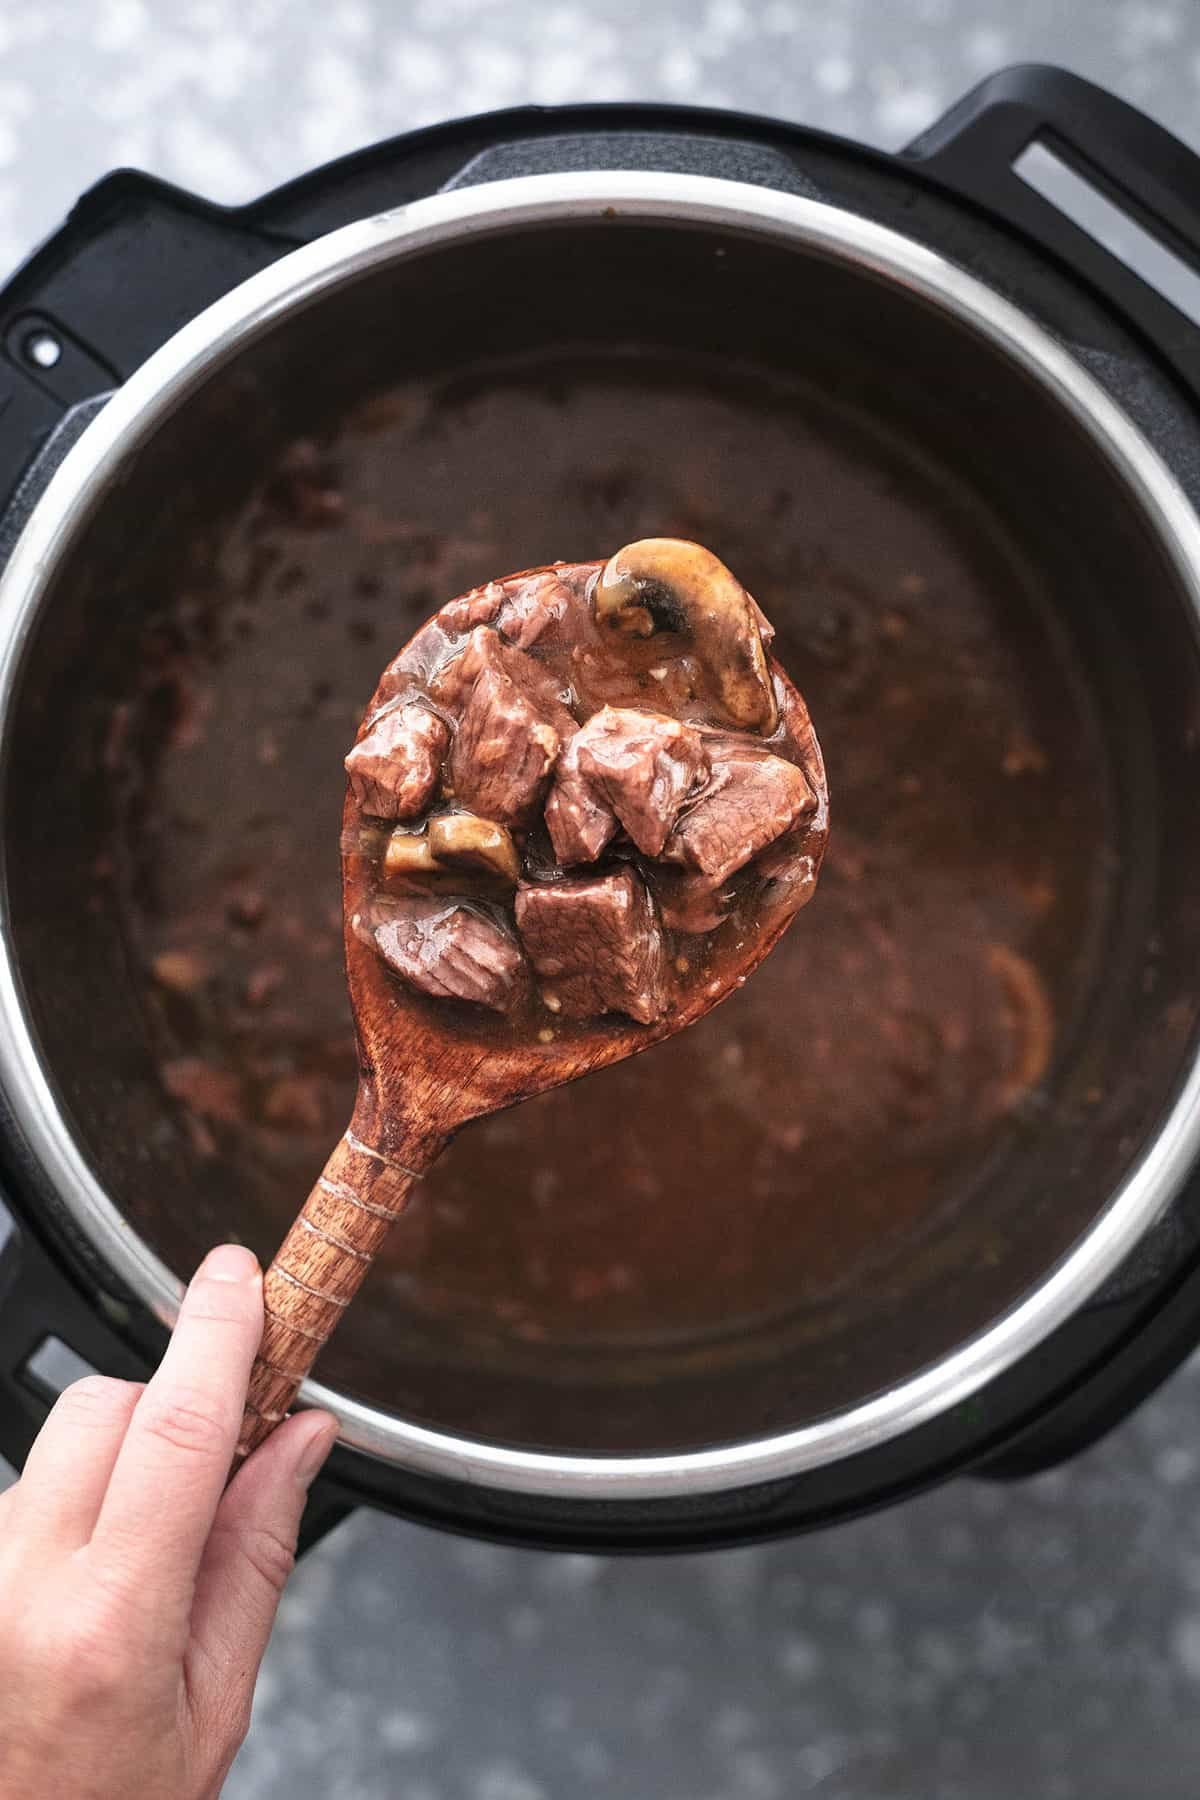 top view of a hand holding a scoop of instant pot beef tips with a wooden serving spoon above an instant pot of more beef tips.